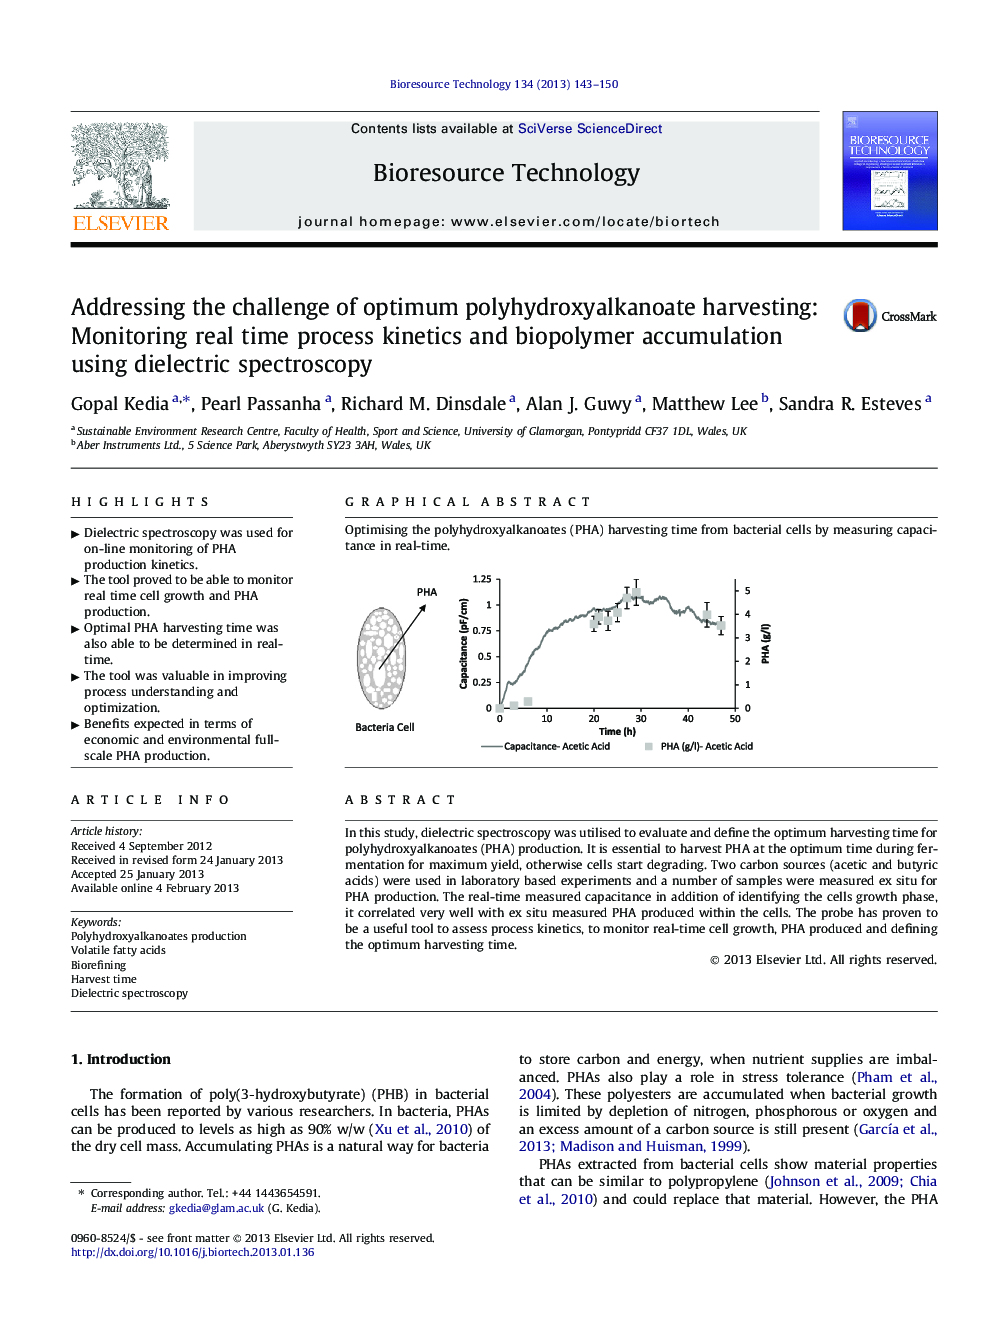 Addressing the challenge of optimum polyhydroxyalkanoate harvesting: Monitoring real time process kinetics and biopolymer accumulation using dielectric spectroscopy